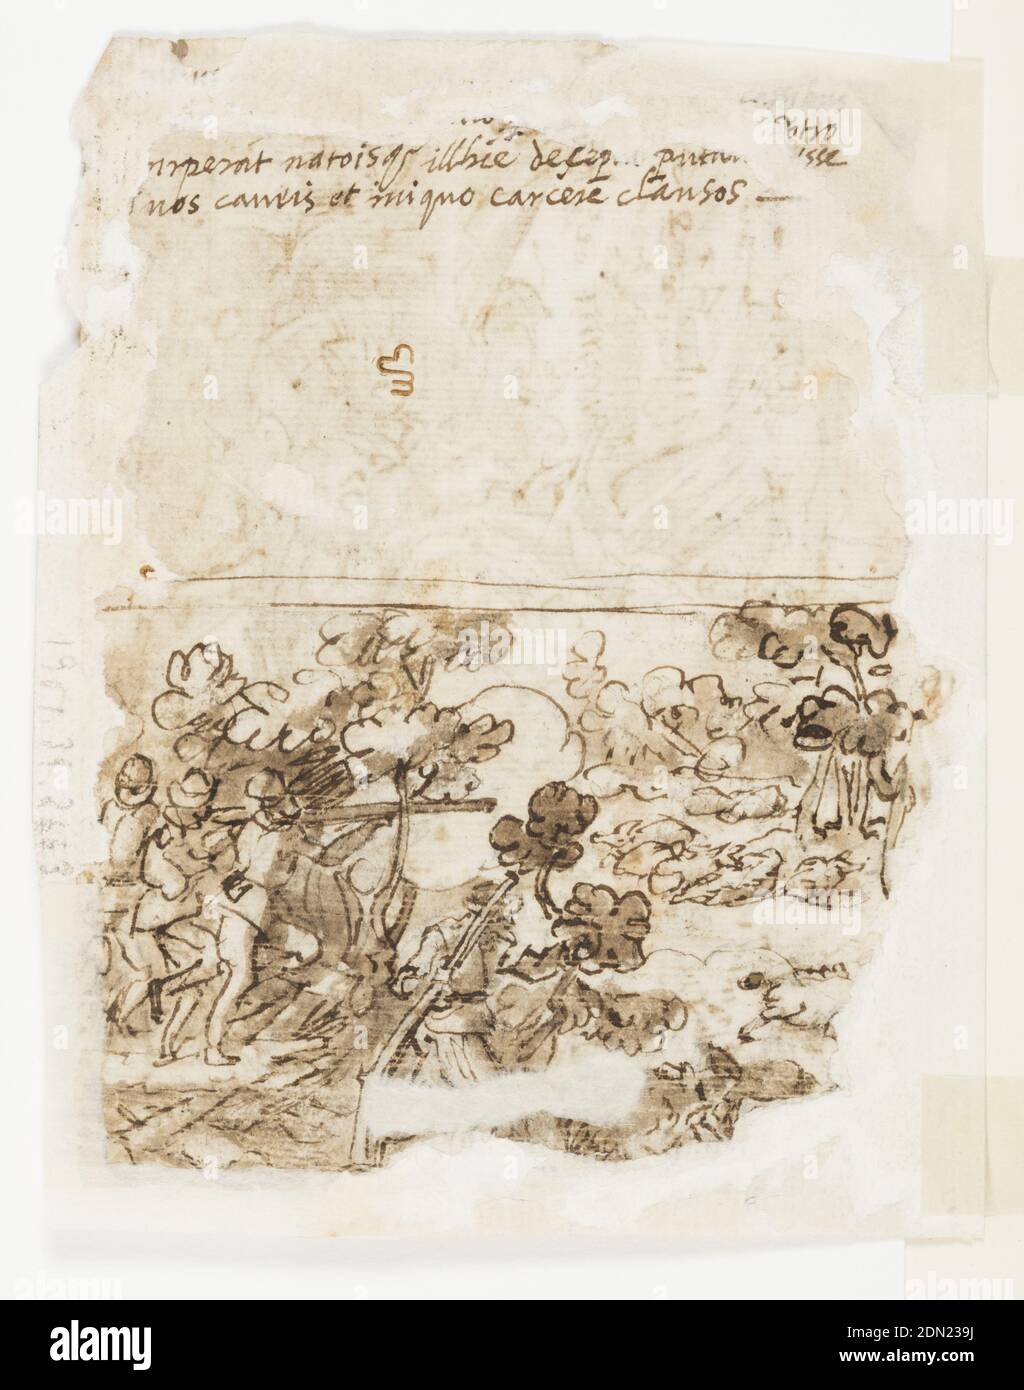 Recto: Minerva, or 'Arma' (Allegory of the Art of War), preliminary design for pl. 2 in the Schema, seu Speculum Principum (Skills of a Prince) series; Verso, above: Deer Hunt with Lassos; Below: Board Hunt with Shotguns, Jan van der Straet, called Stradanus, Flemish, 1523–1605, Pen and brown ink, brush and wash on paper, Horizontal rectangle. Minerva in Roman armor with helmet and shield with Medusa head, surrounded by canon, armor and other implements of war, right. Implements of peacetime industry and study, left. Battlefield in background, right; marketplace, left. Recto: Hunting scene Stock Photo